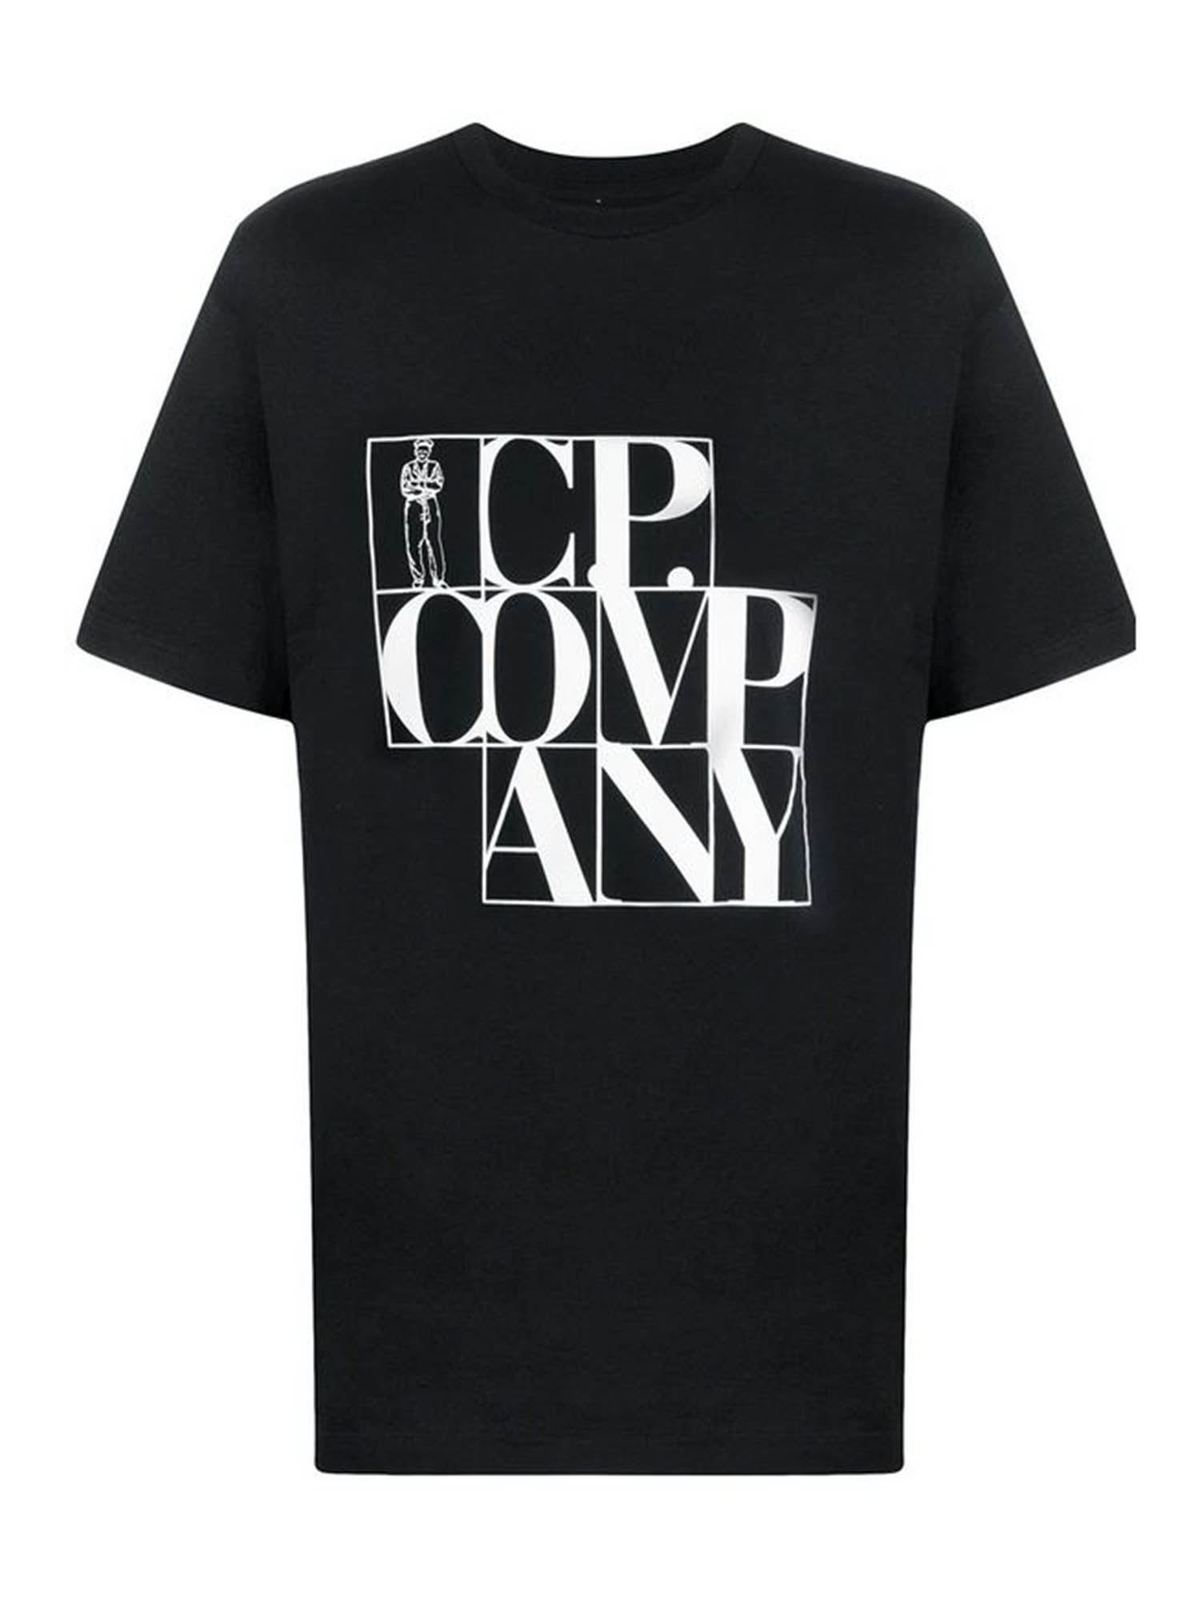 C.P. COMPANY LETTERING LOGO PRINTED T-SHIRT IN BLACK